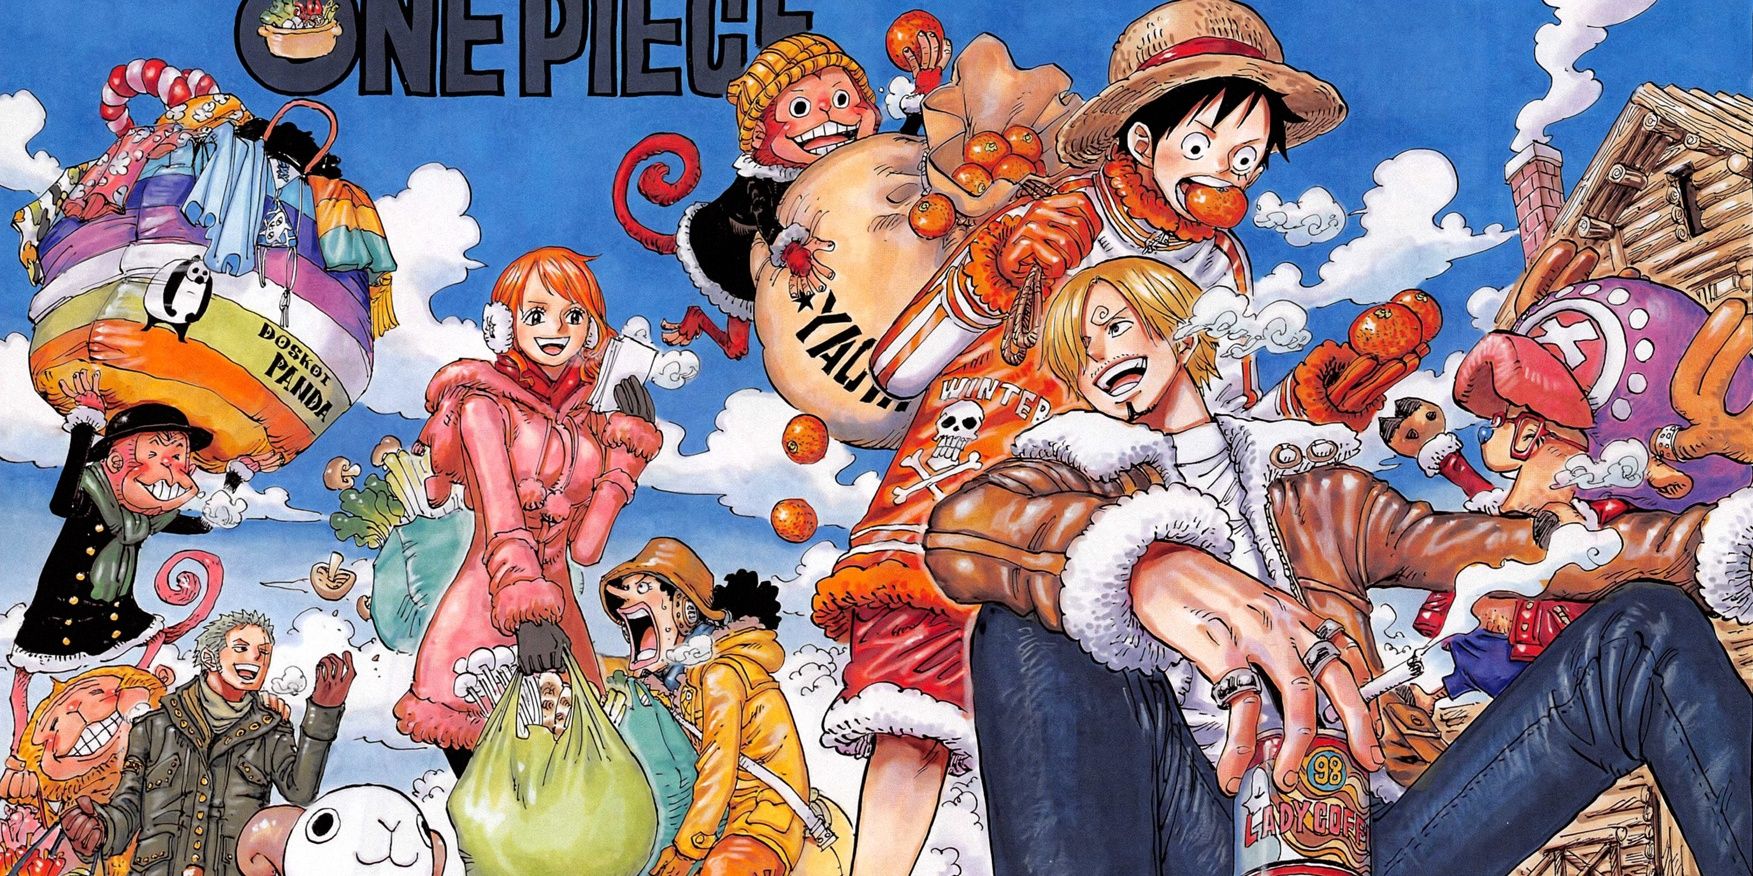 ONE PIECE Character BEST FESTIVAL